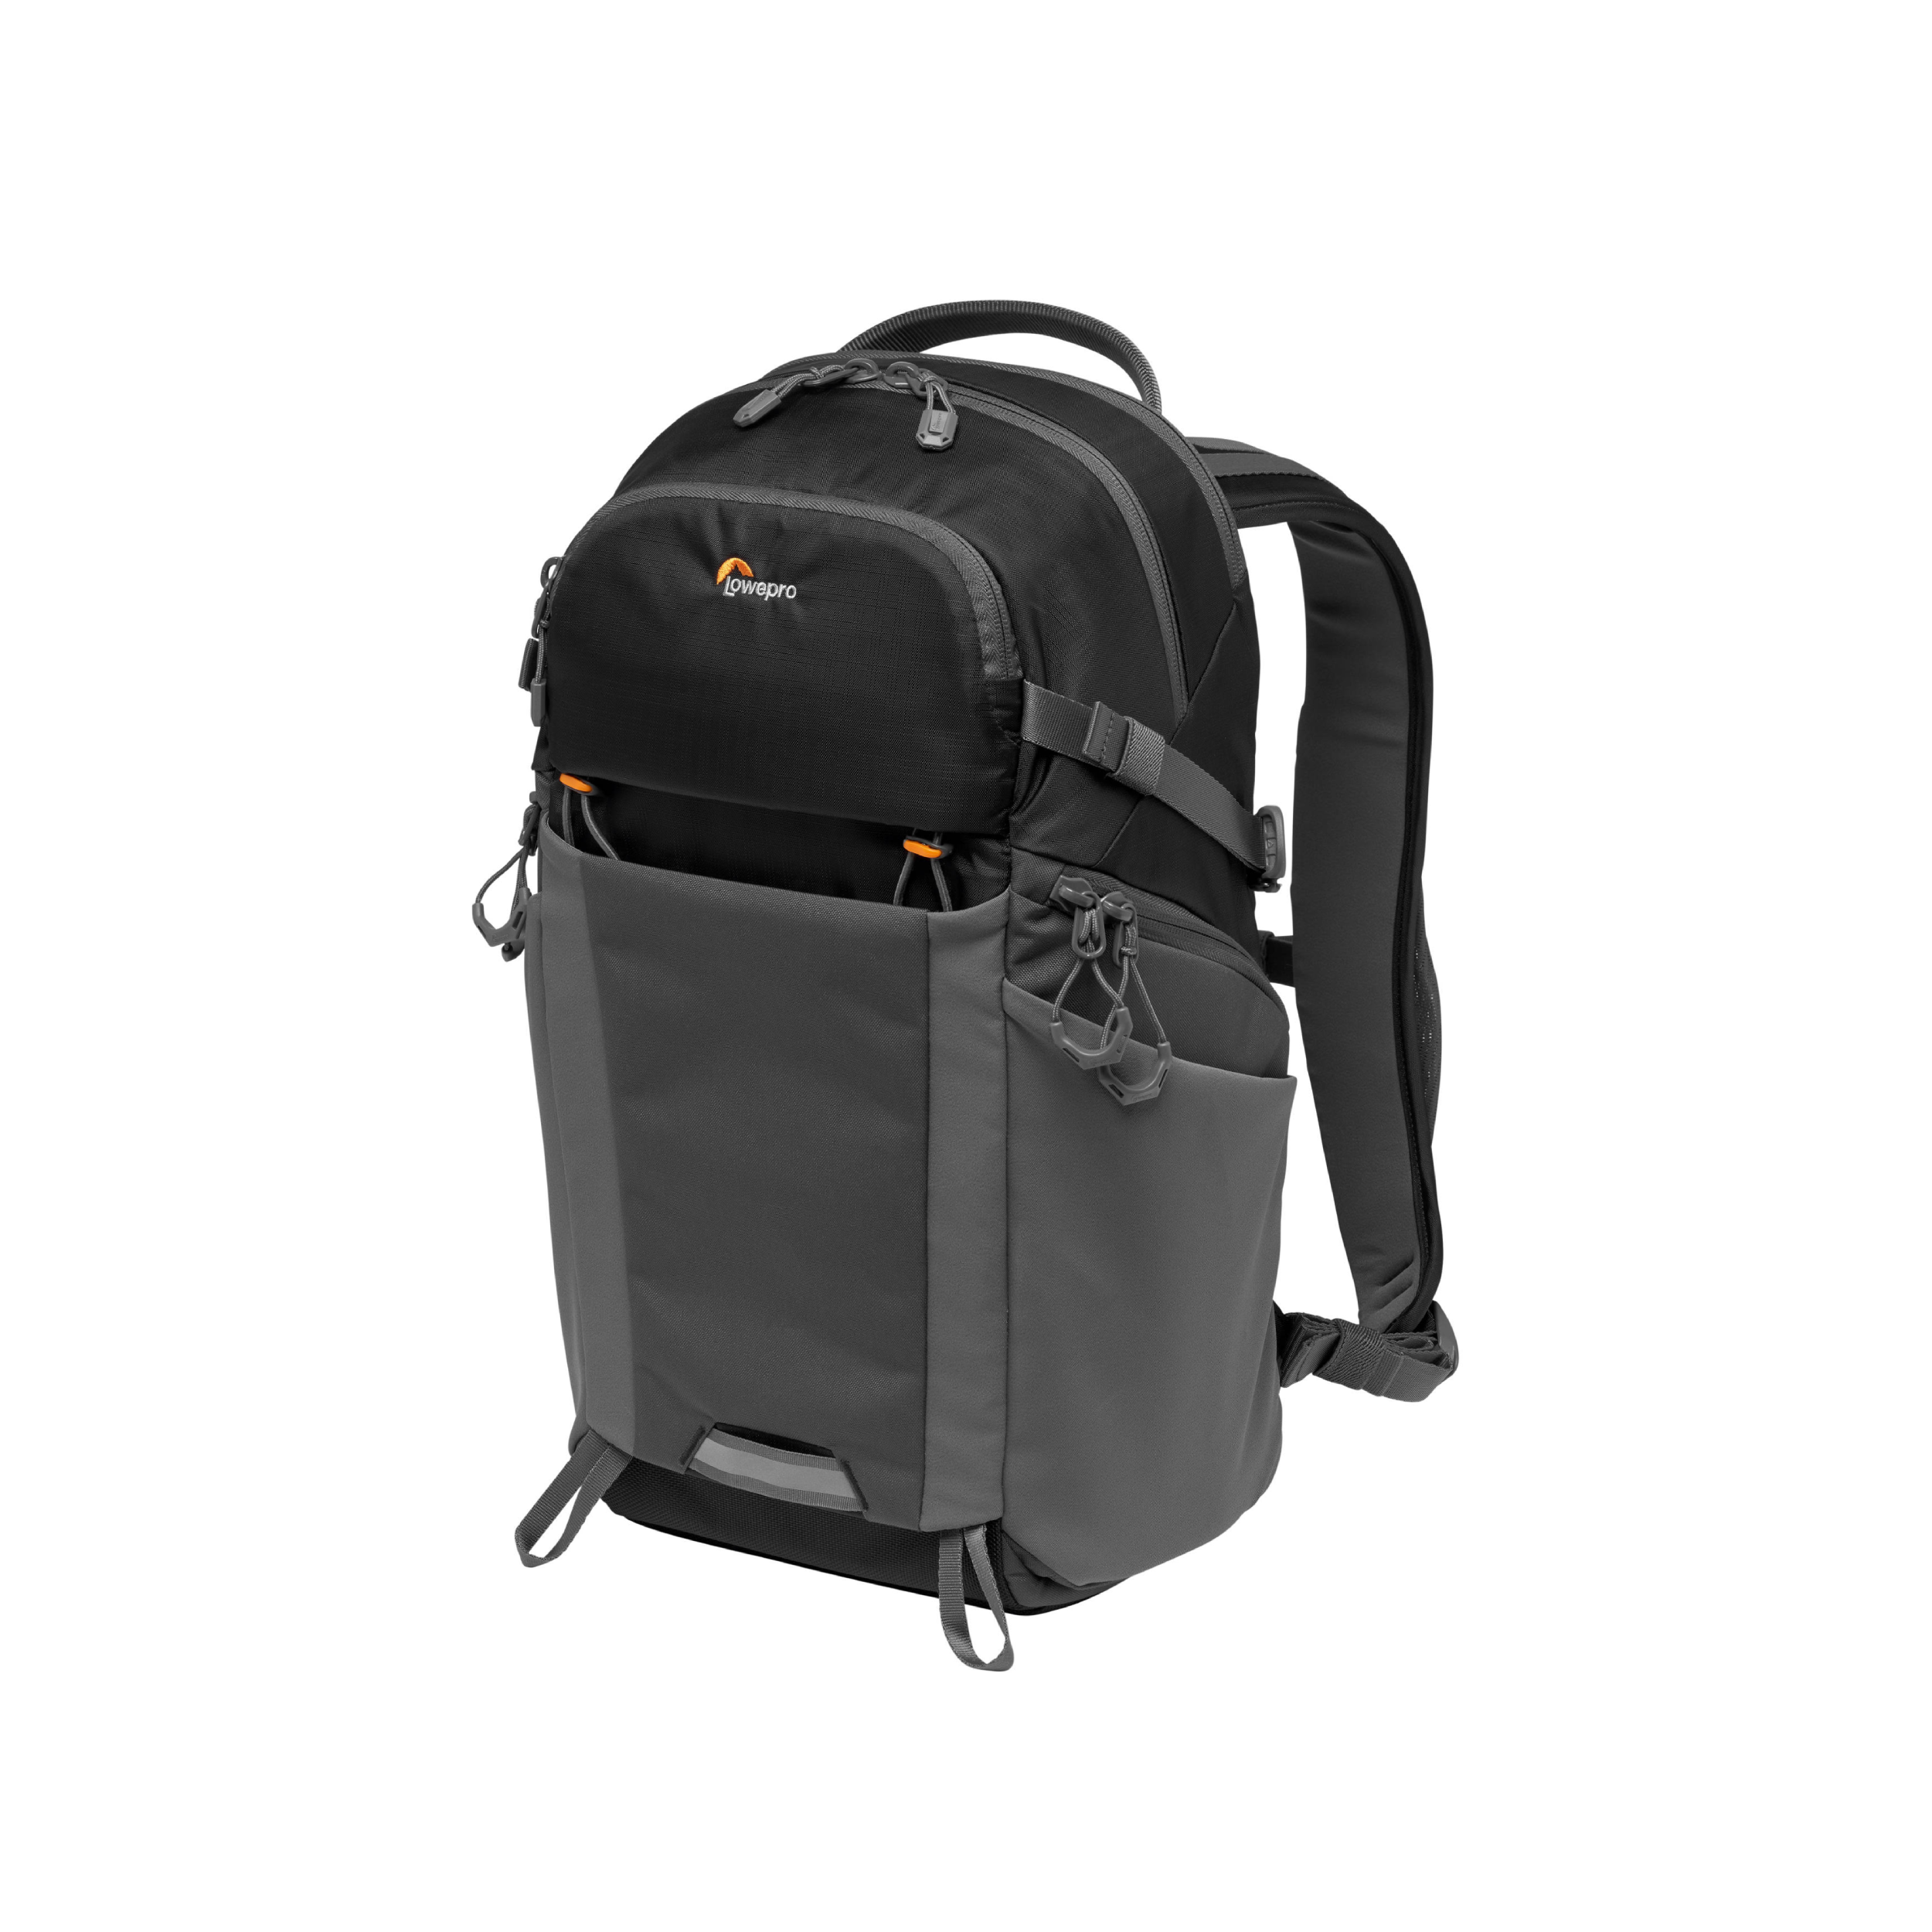 Lowepro Photo Active BP Backpack - 200 AW - Black